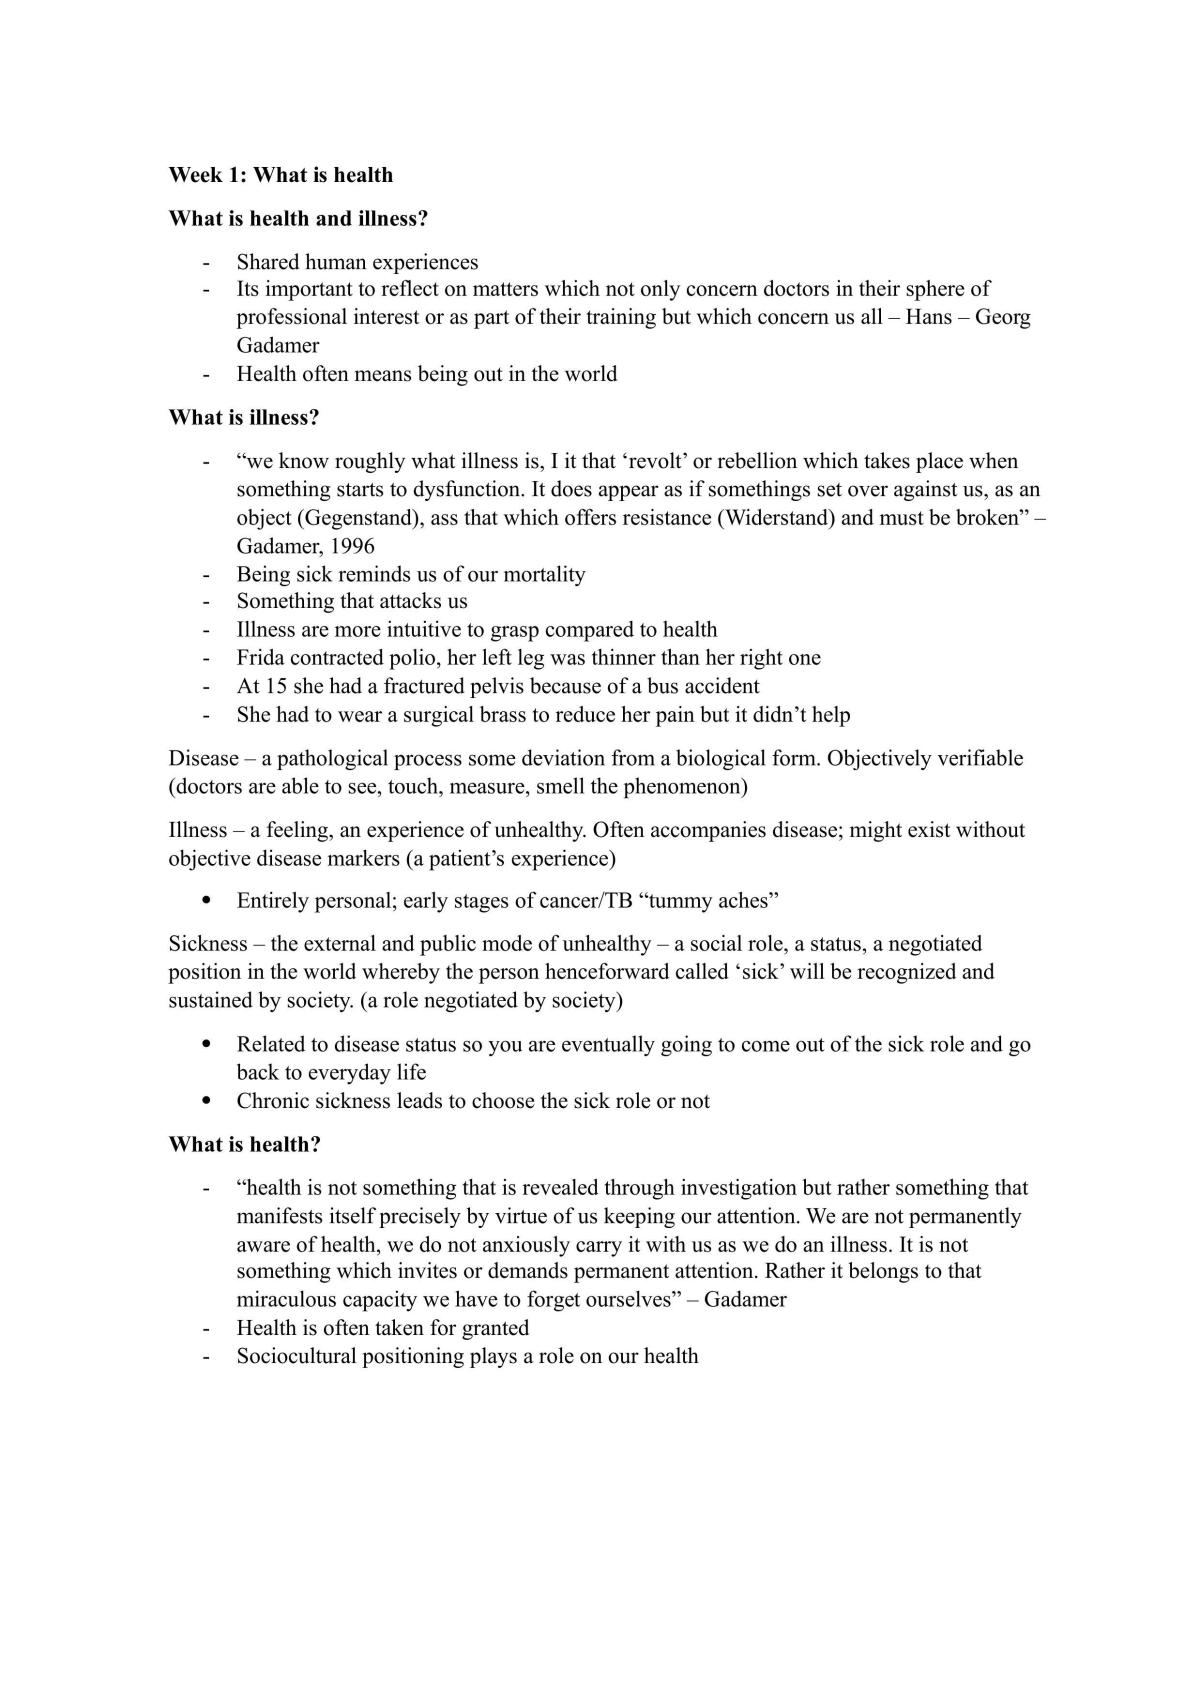 Study Guide for Introduction to Health Studies - Page 1